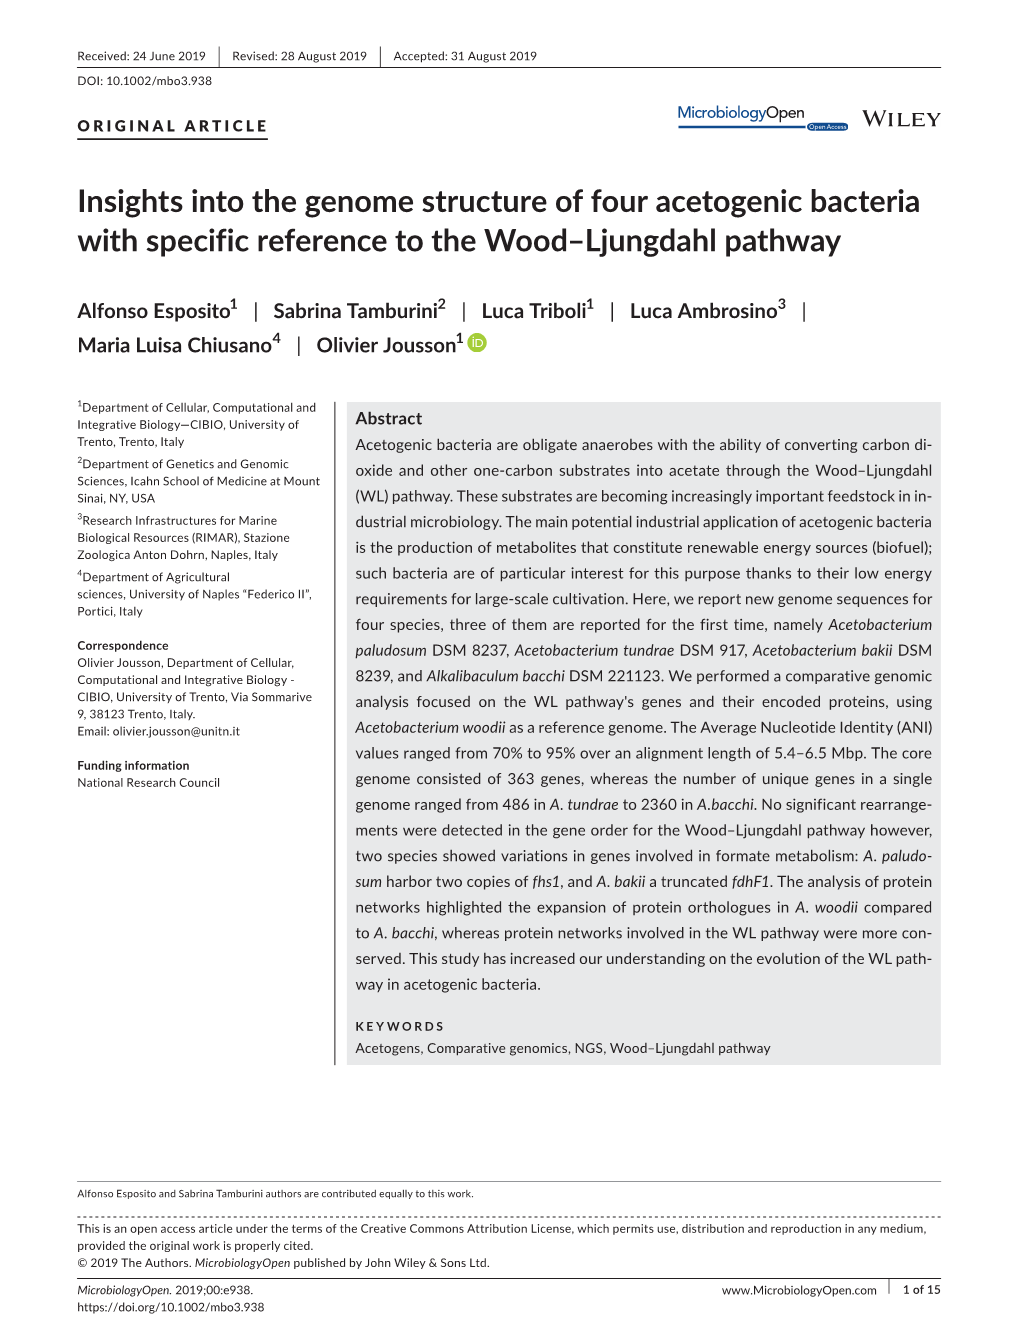 Insights Into the Genome Structure of Four Acetogenic Bacteria with Specific Reference to the Wood&#X2013;Ljungdahl Pathway